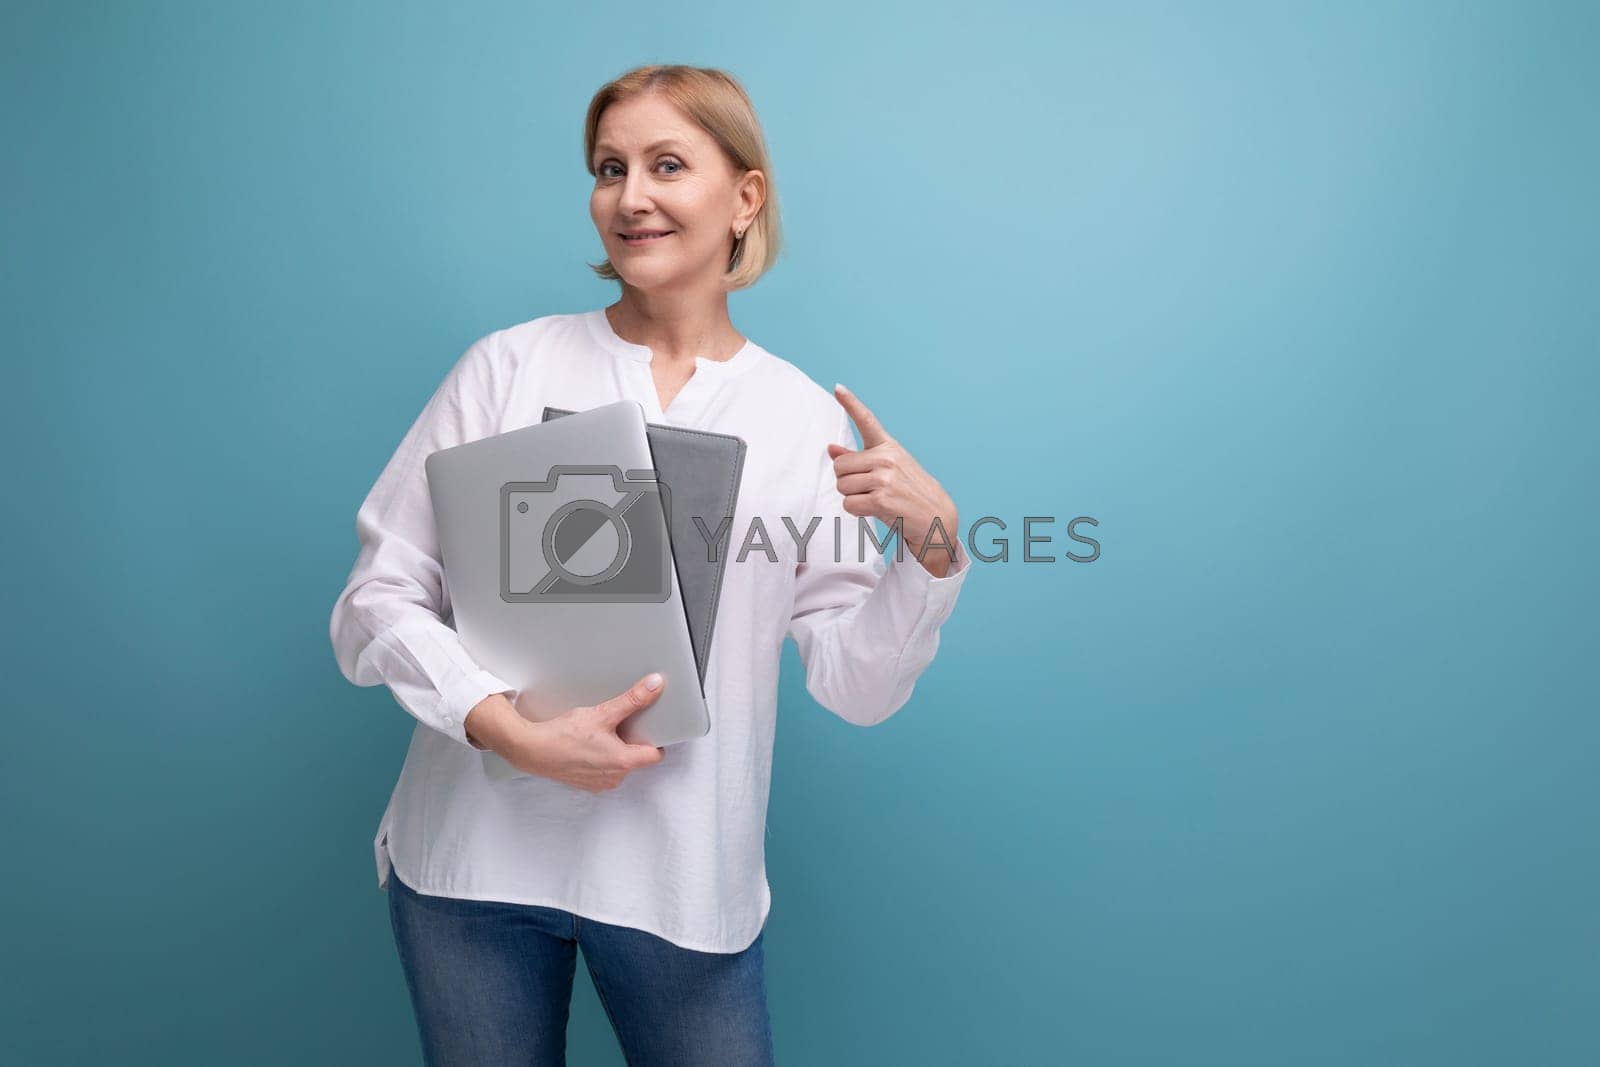 Royalty free image of serious adult woman with blond hair working remotely using laptop by TRMK